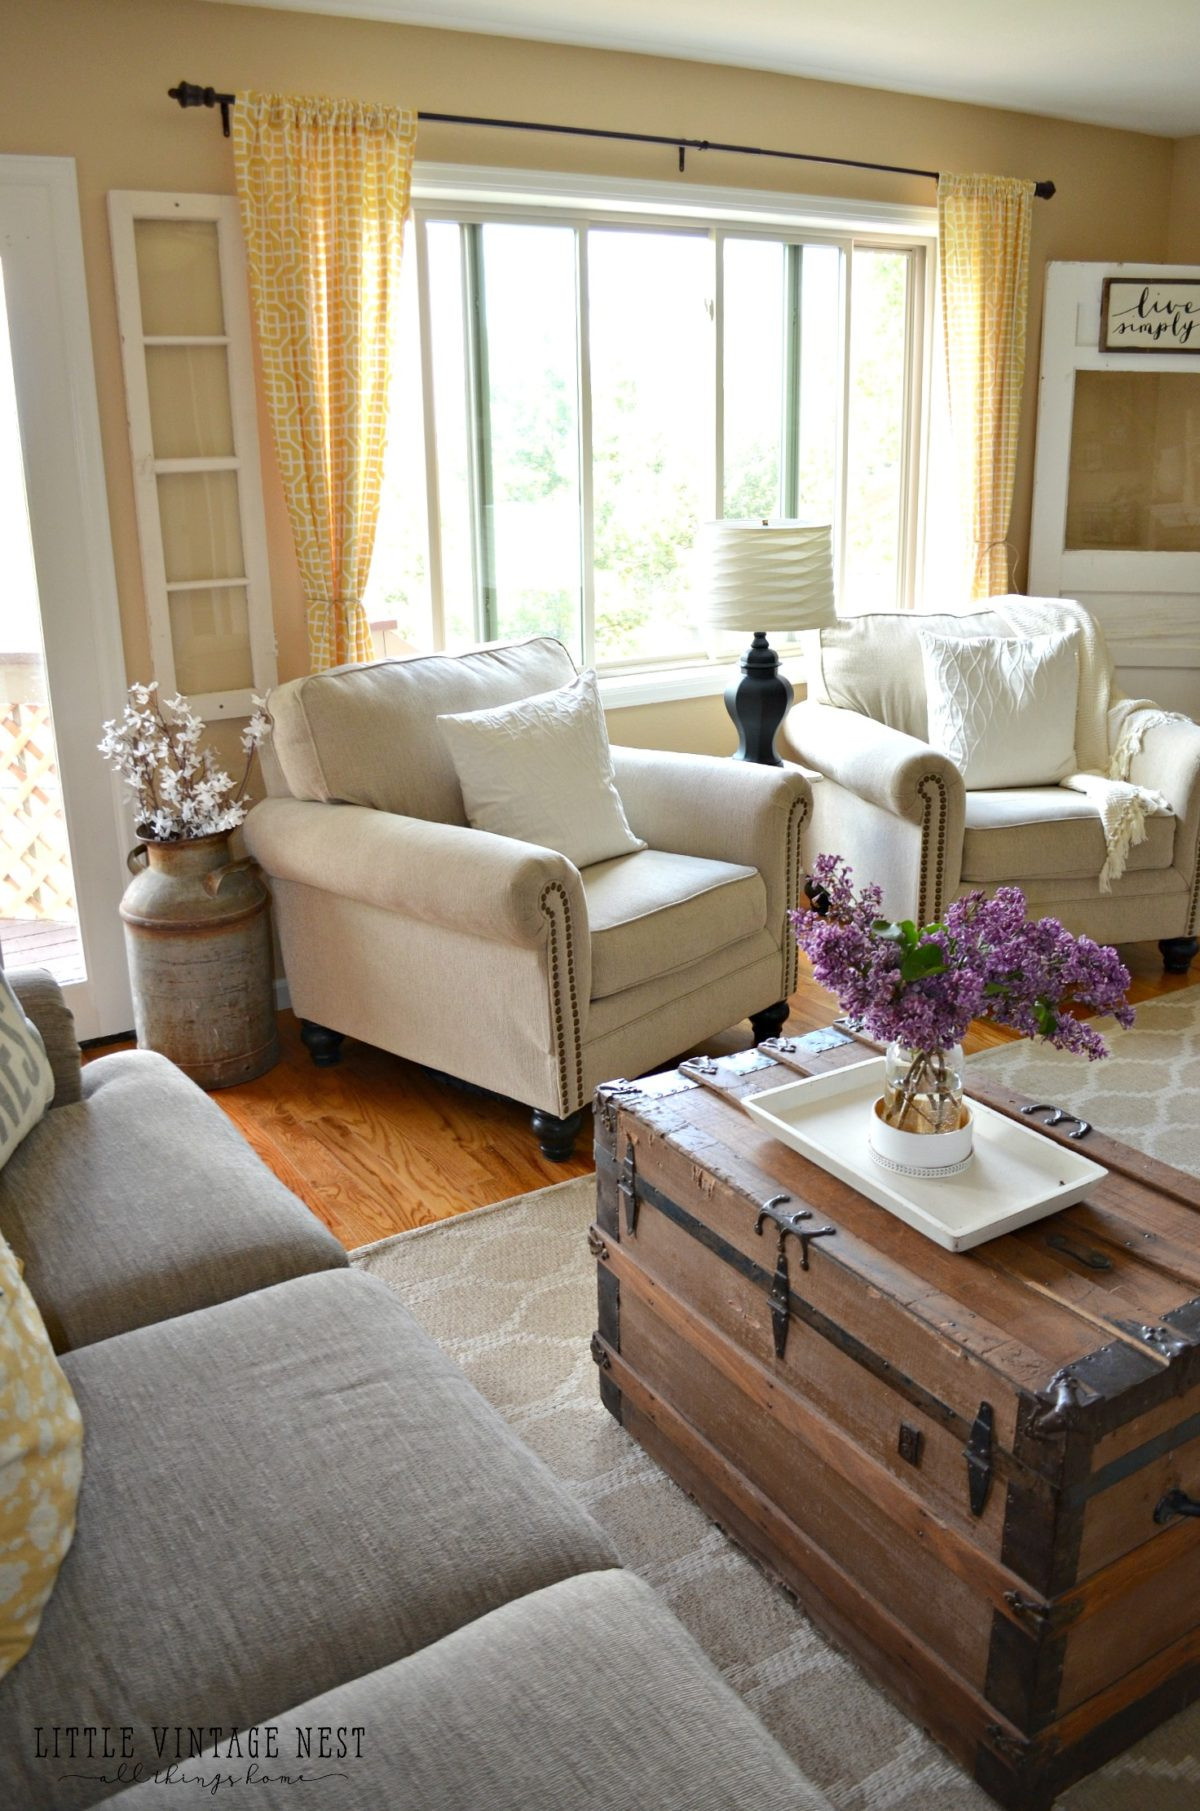 Farmhouse Living Room Decor Ideas
 How I Transitioned to Farmhouse Style Little Vintage Nest